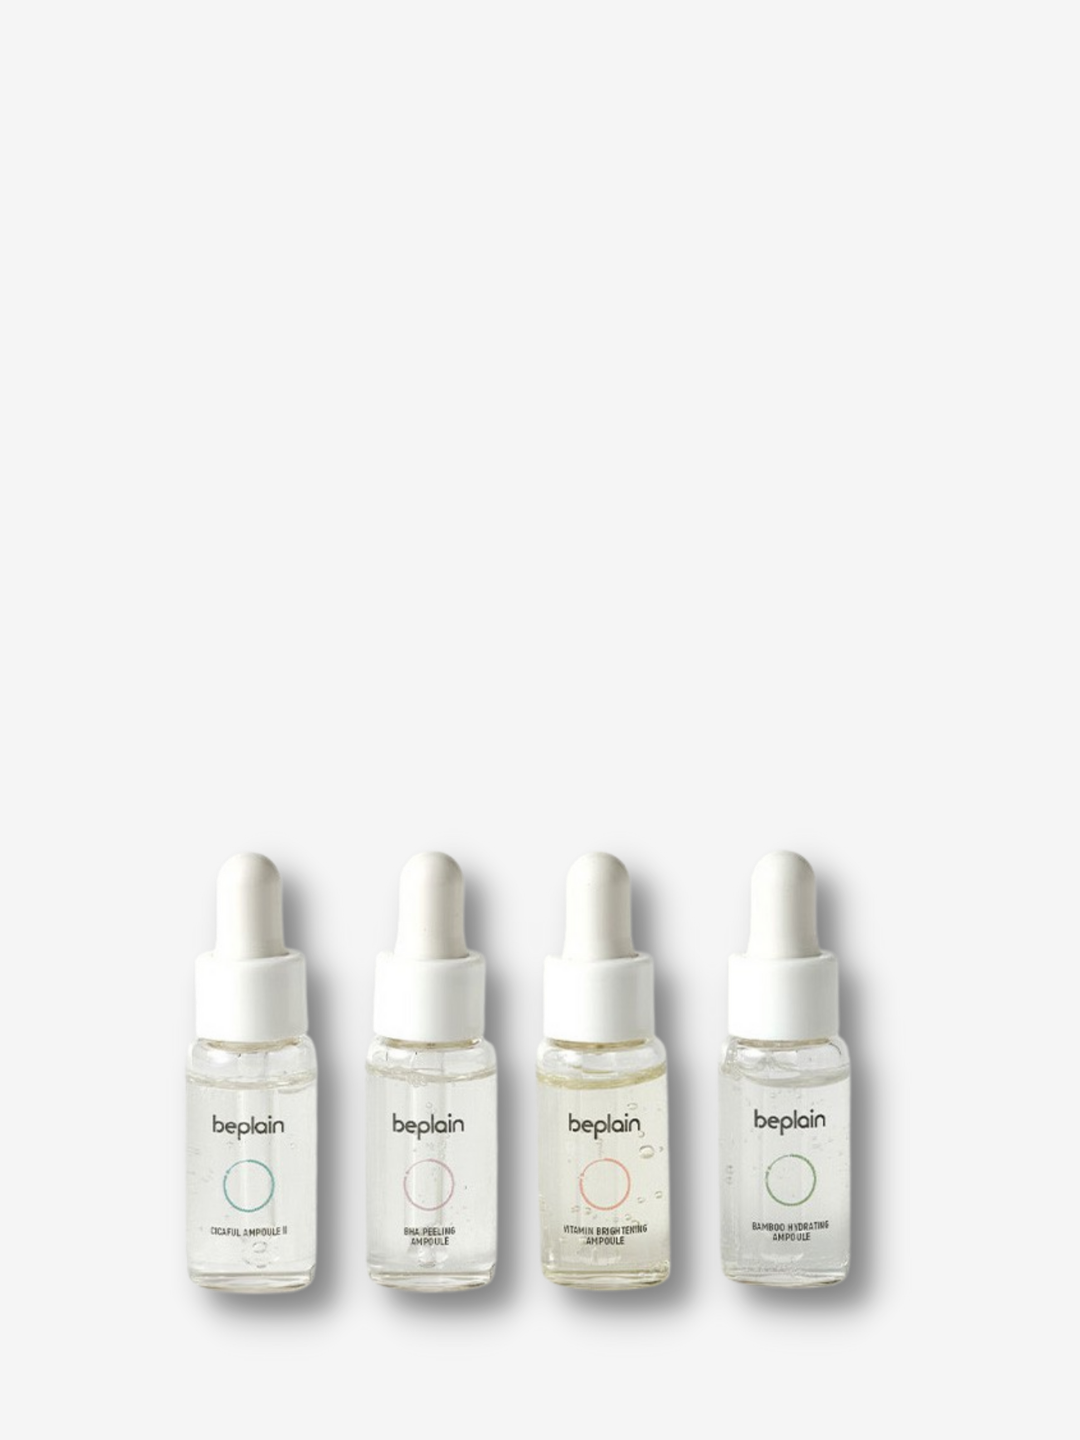 beplain - Ampoule Discovery Set